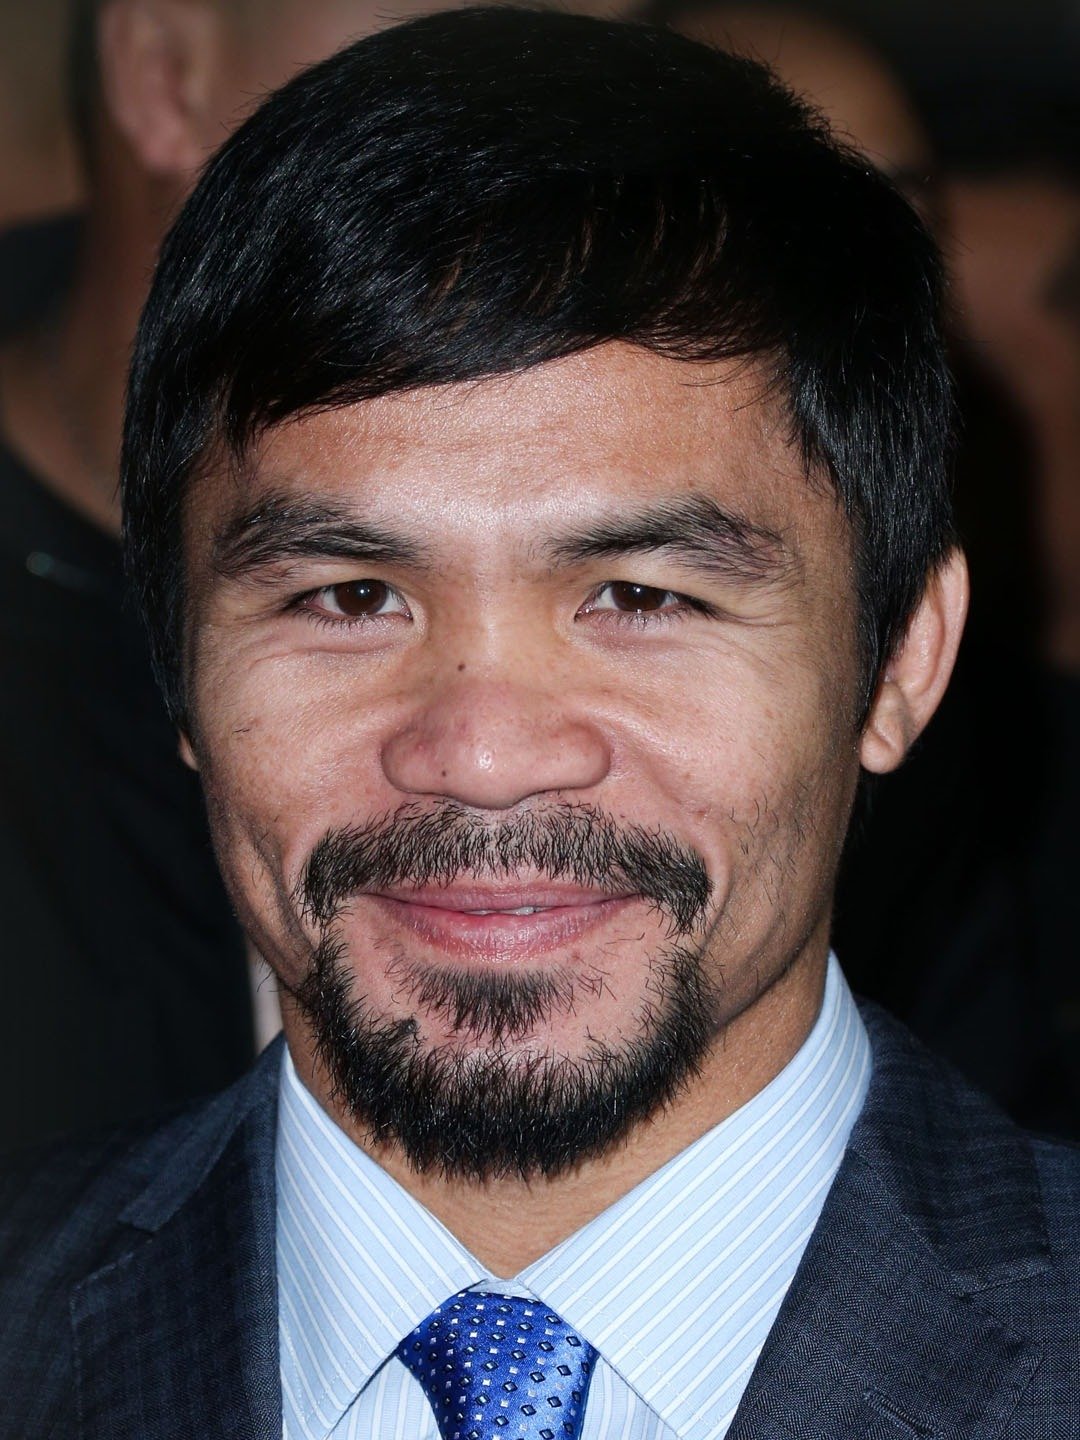 How tall is Manny Pacquiao?